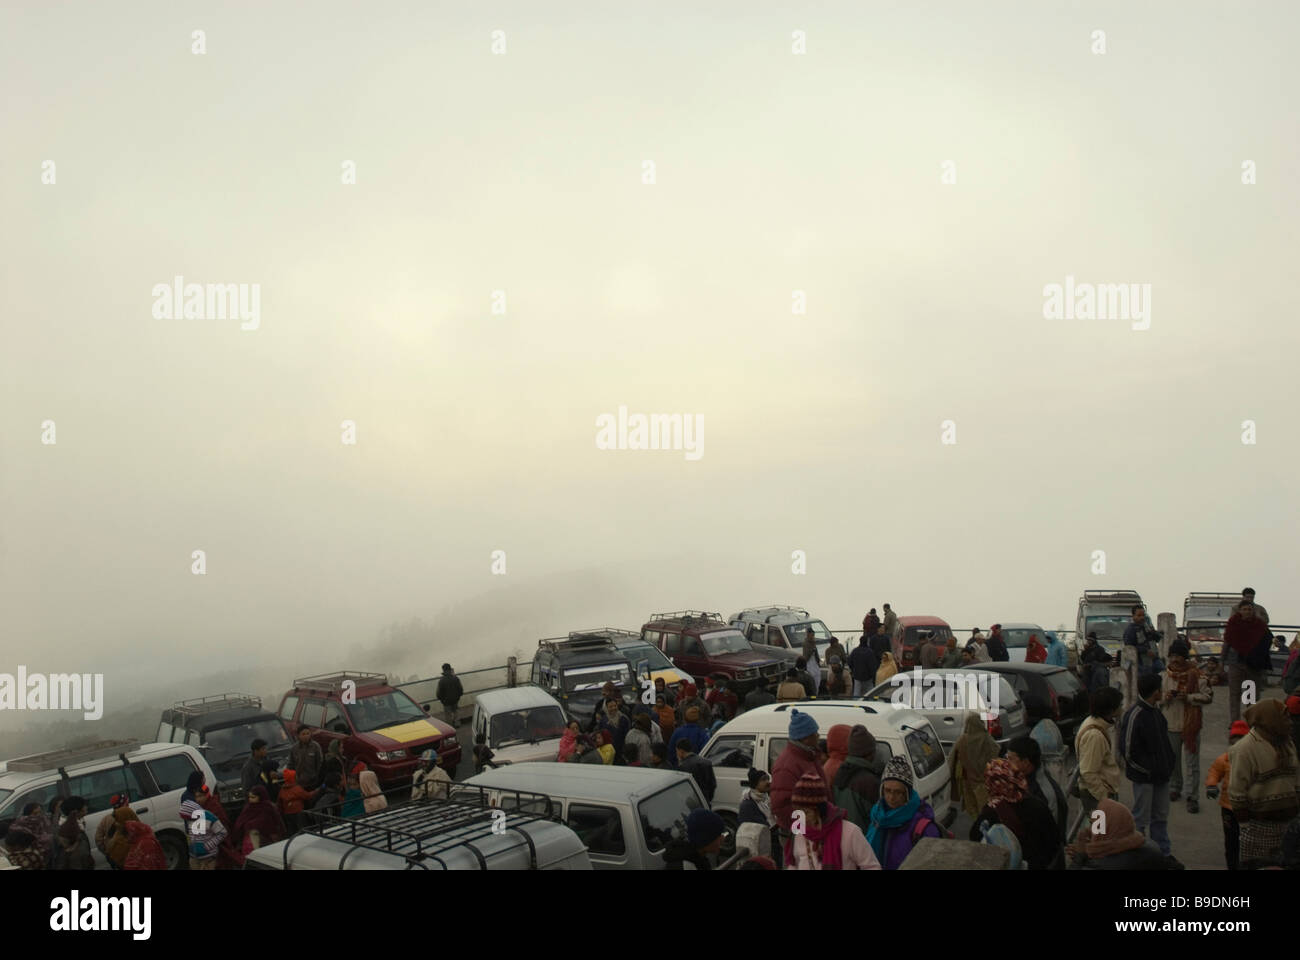 Tourists at a taxi stand, Darjeeling, West Bengal, India Stock Photo